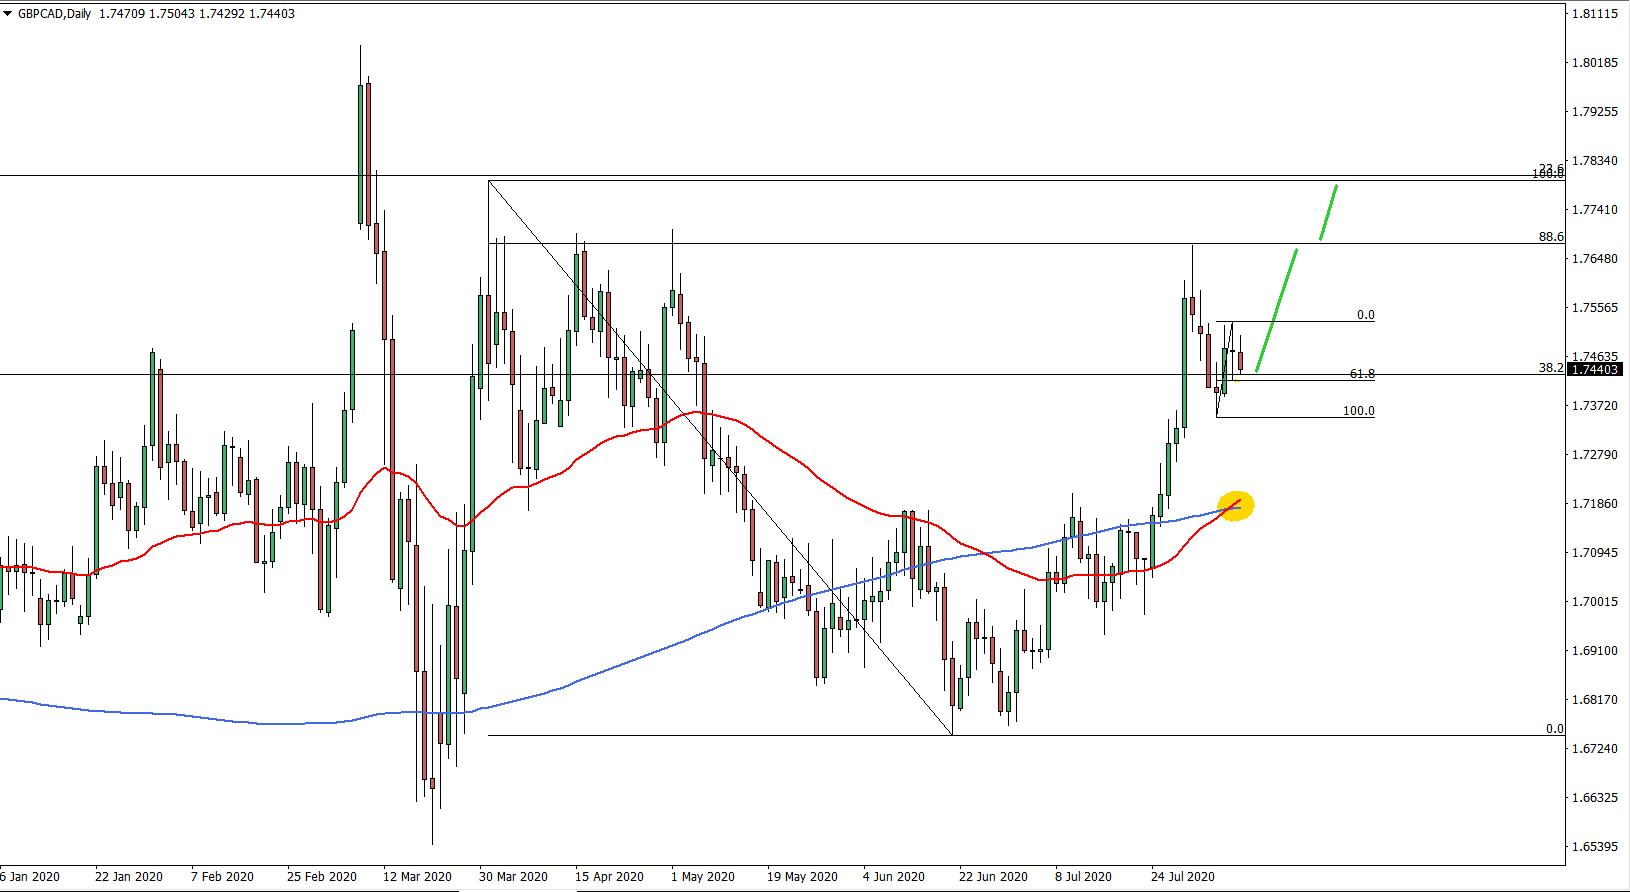 GBPCAD daily chart Aug 10 2020